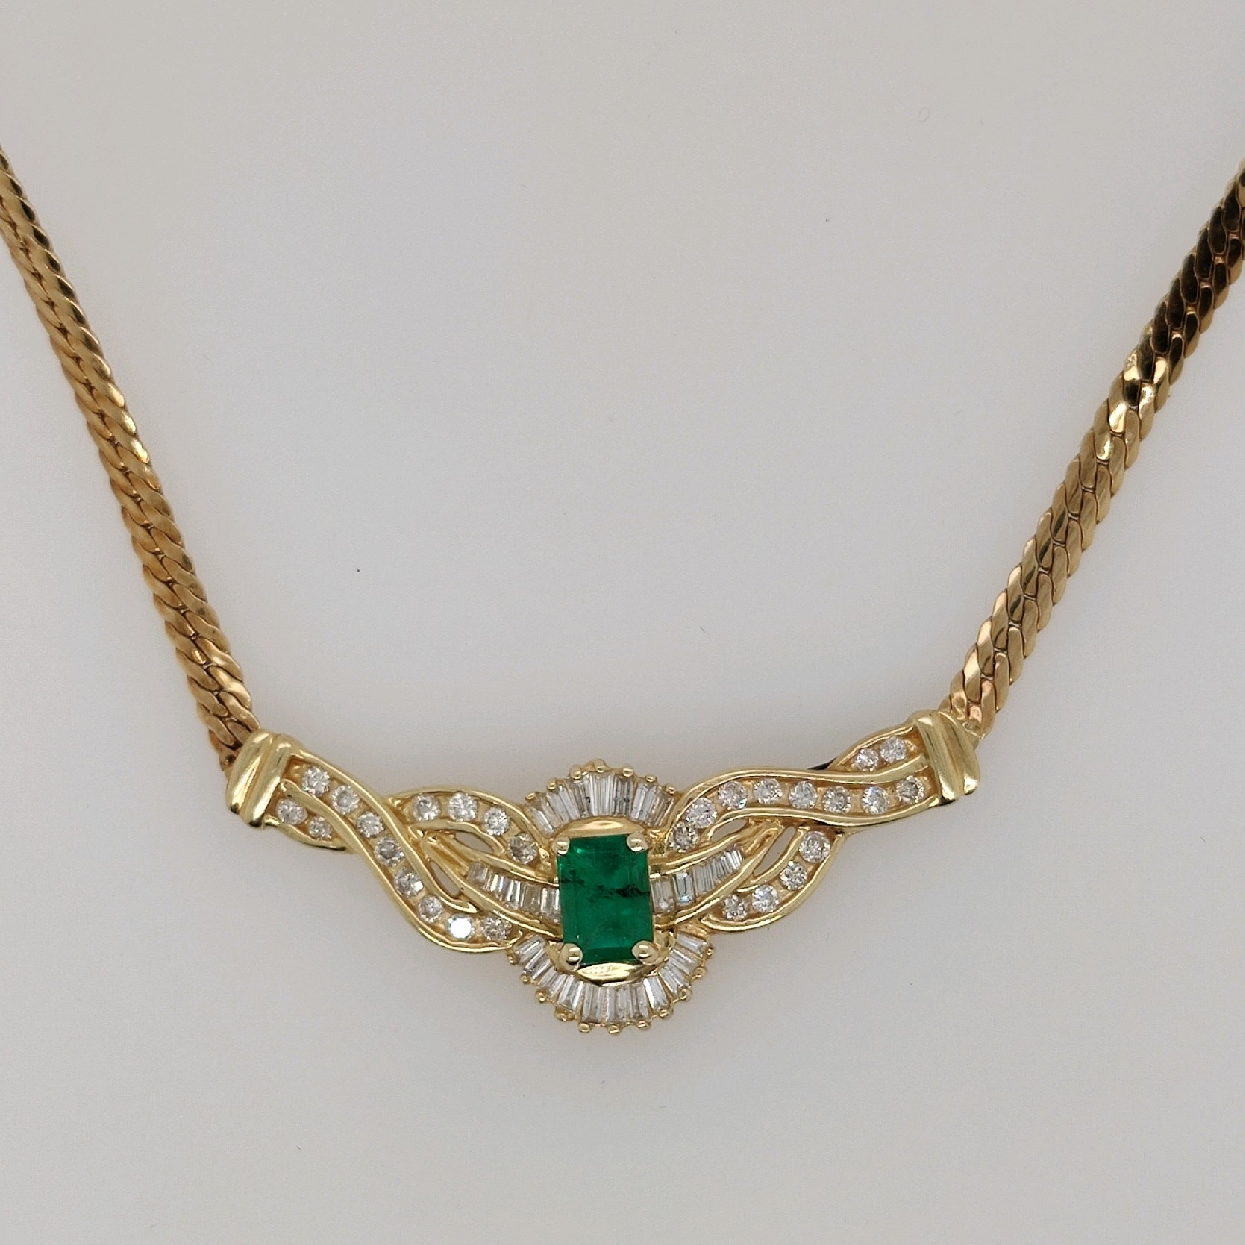 14K Yellow Gold Flat Woven Chain with Emerald and Diamond Pendant; 17.5 inches
Approximately 1CT Emerald
Approximately 0.94 CTTW Diamonds; H-I/SI2-I1

Appraisal on File